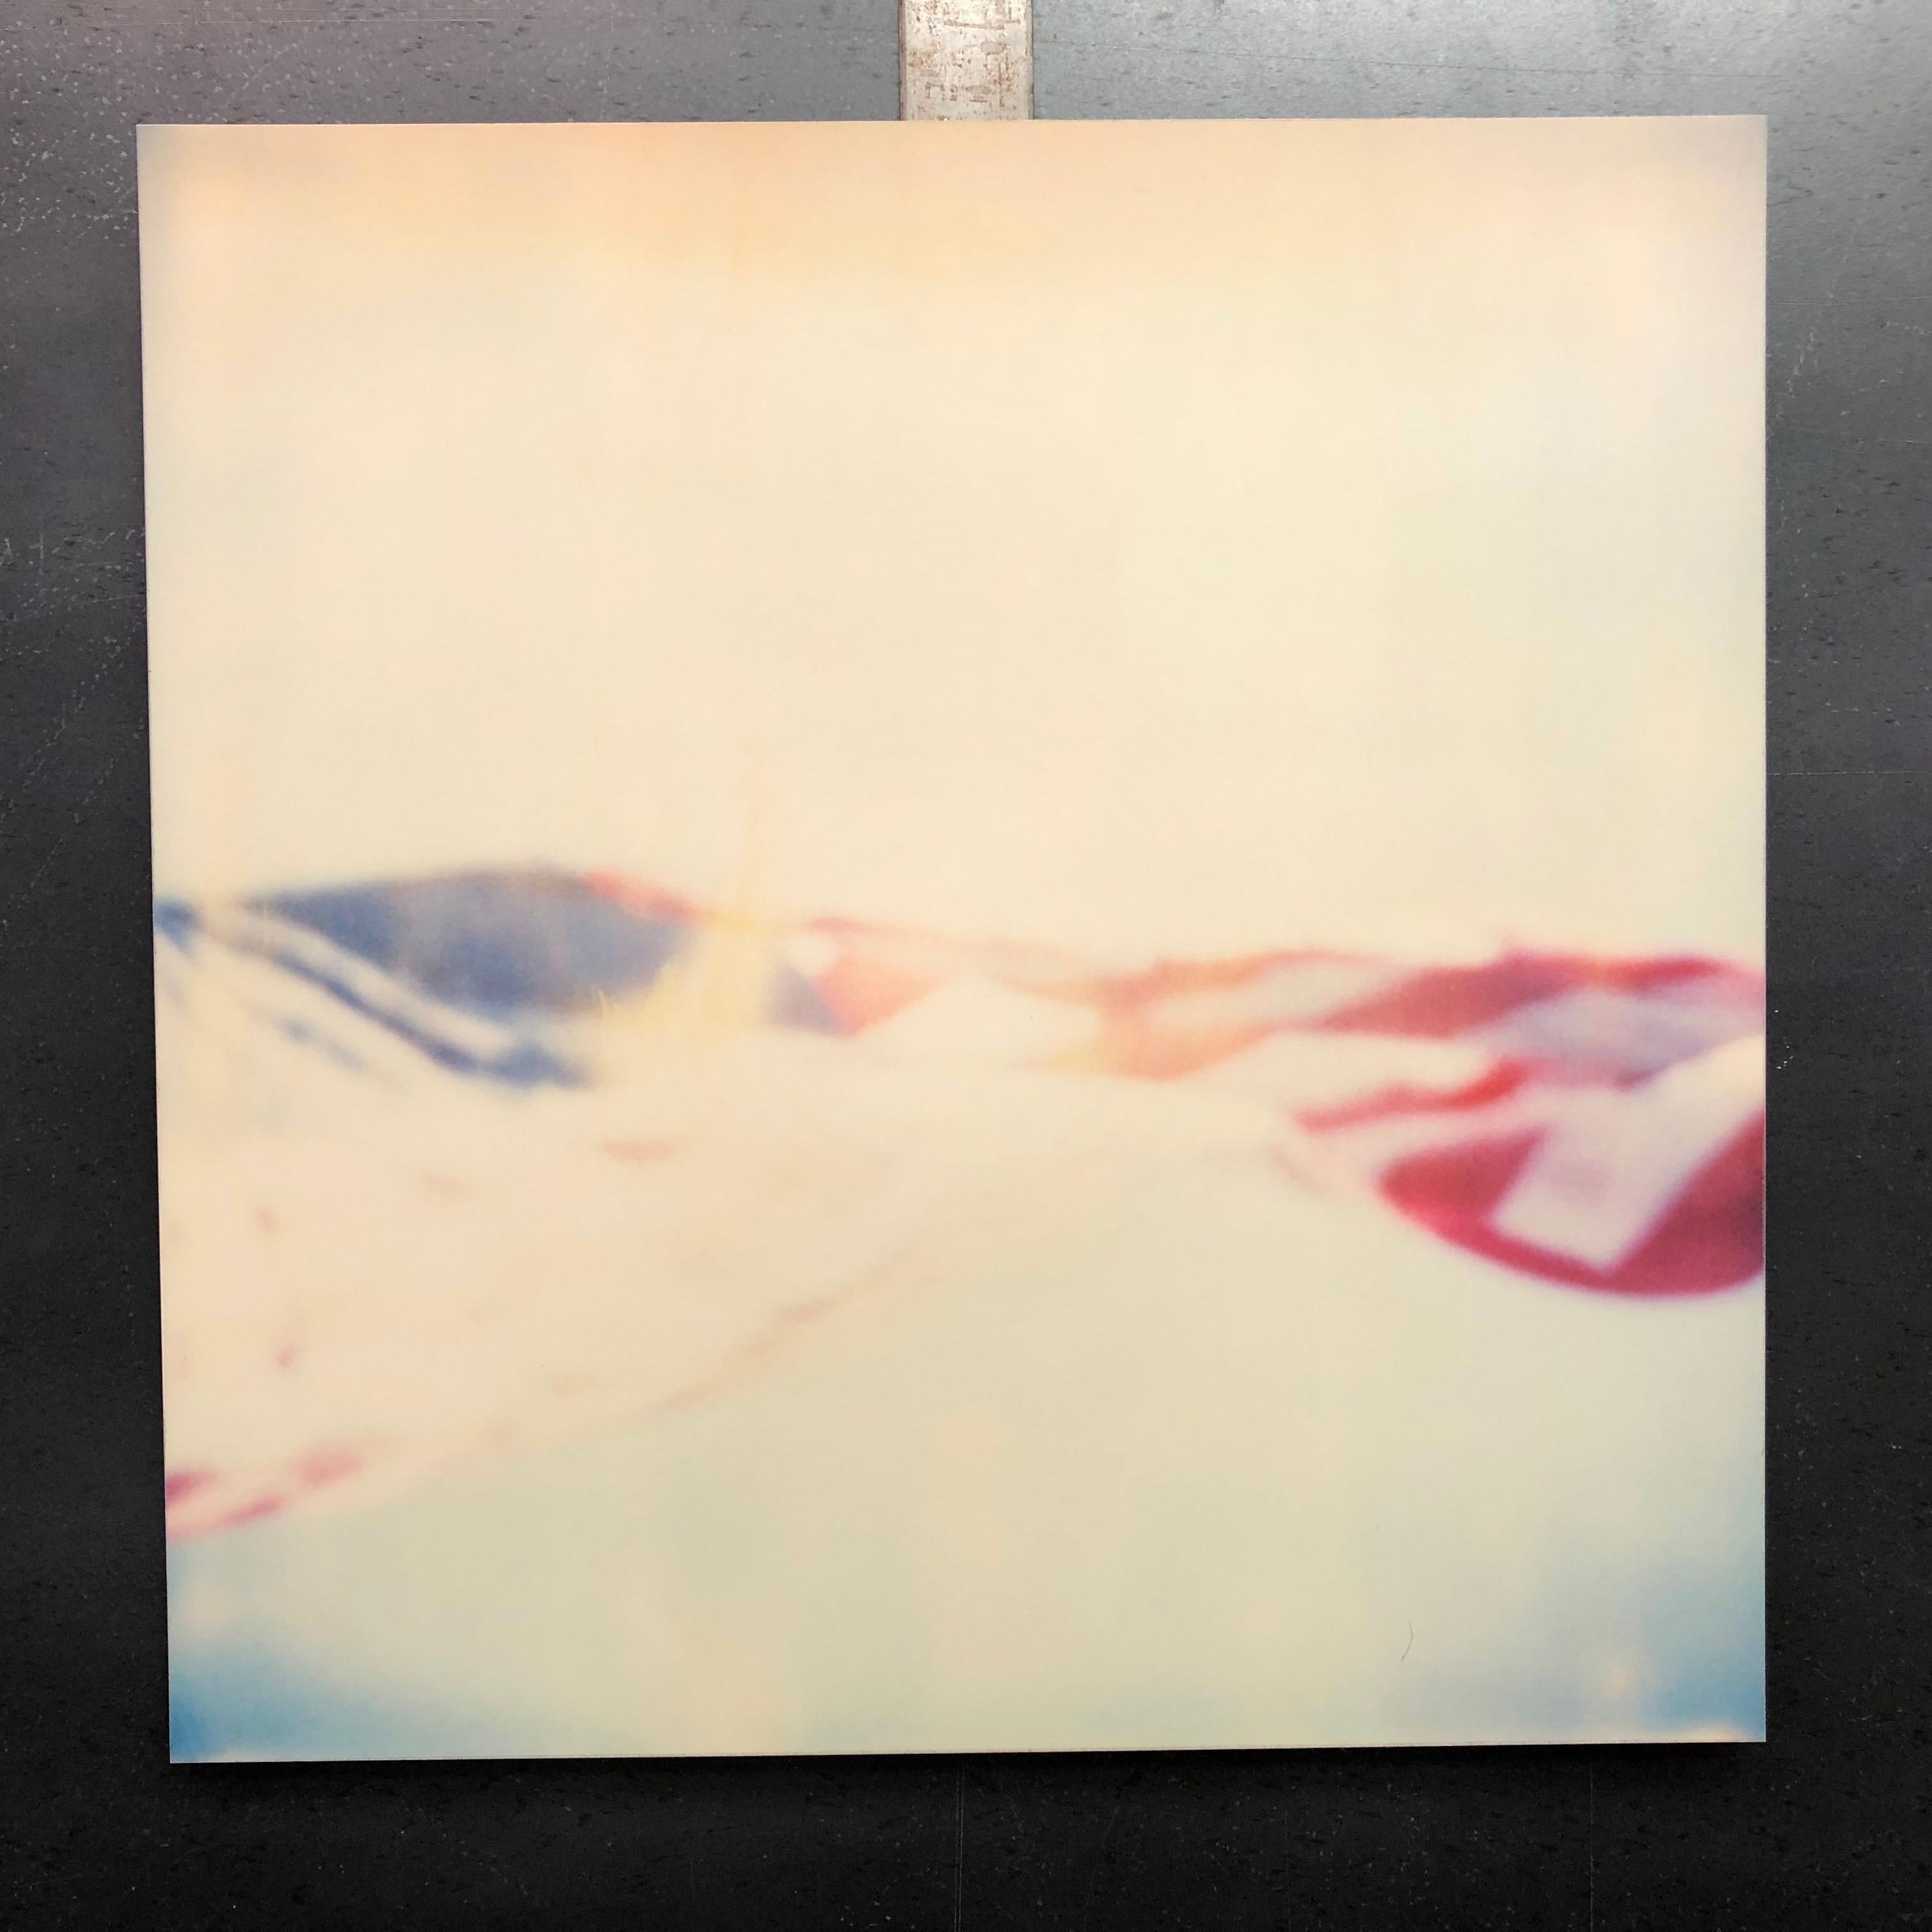 Primary Colors - Contemporary, Abstract, Landscape, USA, Polaroid, Flag - Gray Color Photograph by Stefanie Schneider